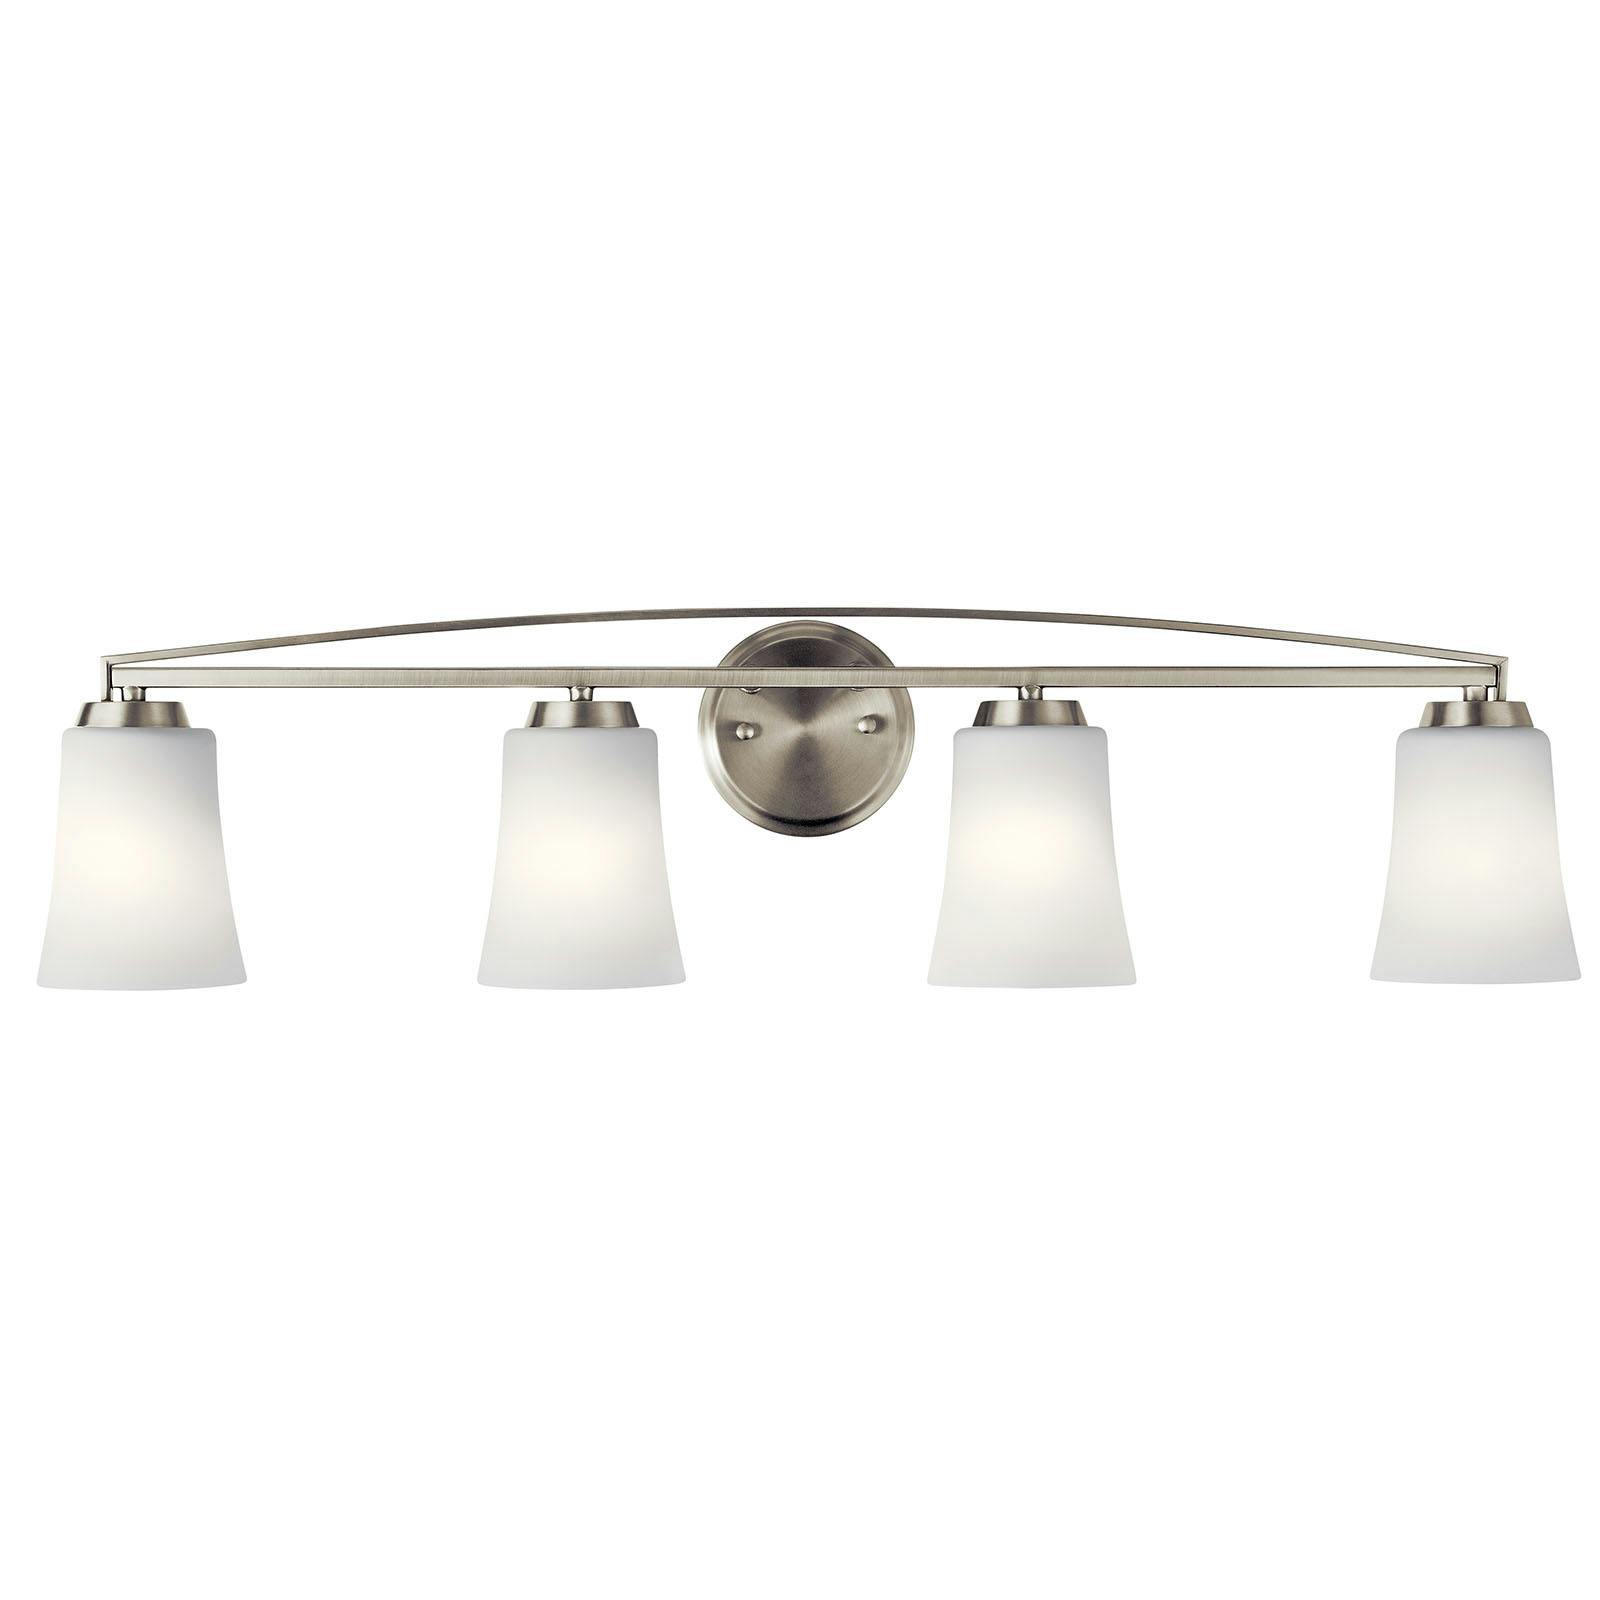 The Tao 4 Light Vanity Light Brushed Nickel facing down on a white background